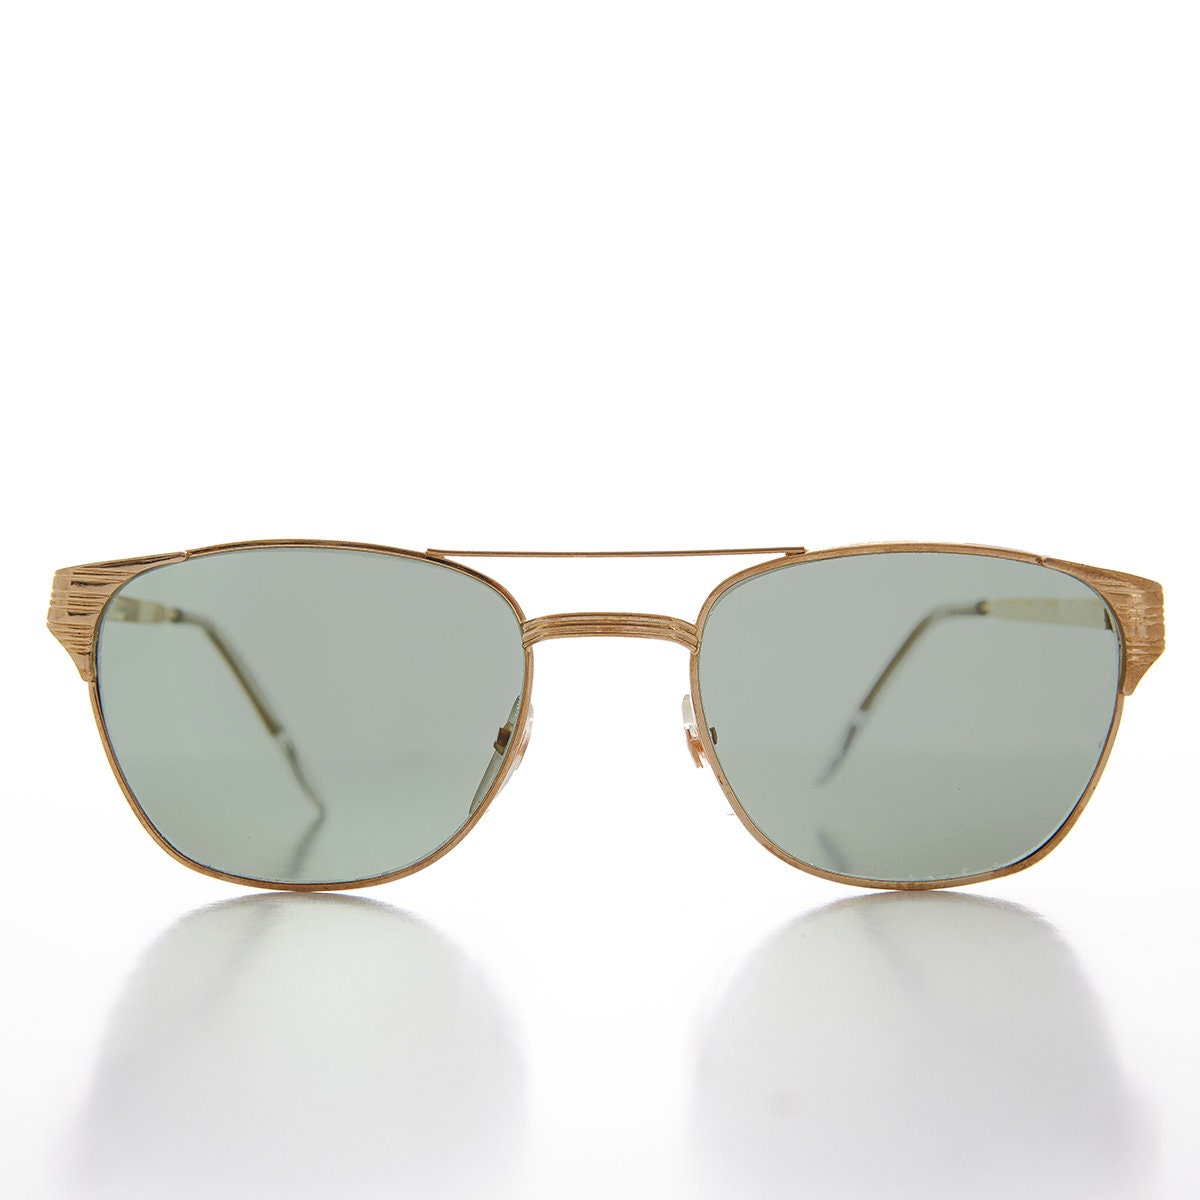 Sunglass Museum Vintage Aviator Sunglass with Cable Temples and Glass Lens - Wolfman - 58mm / Gold Frame / Black Temples